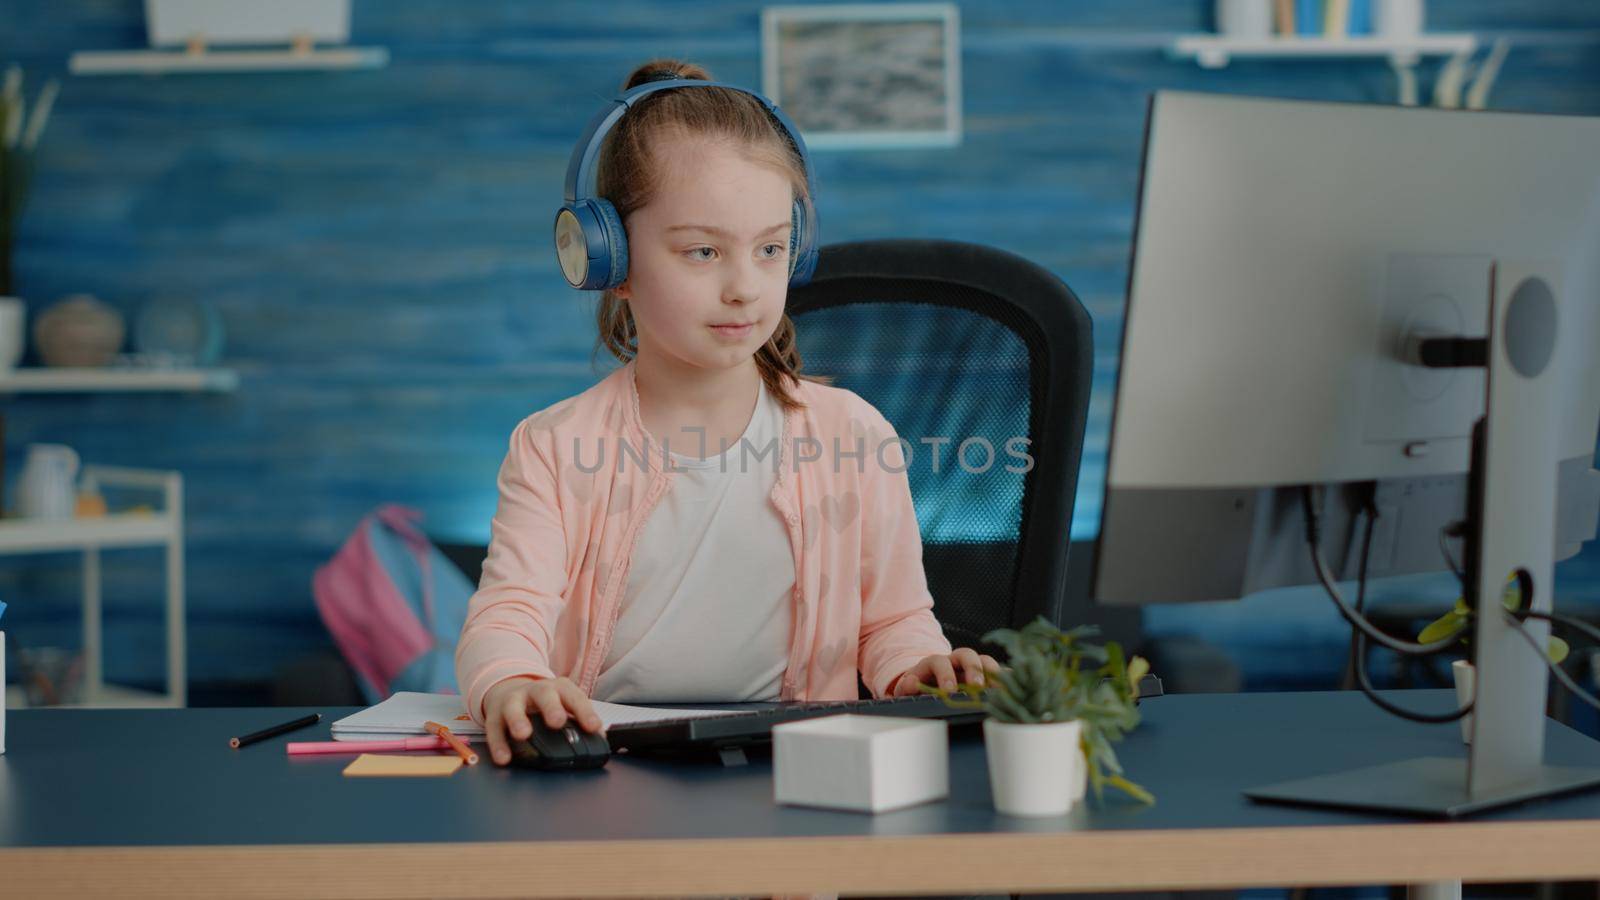 Young child wearing headphones and drawing on textbook by DCStudio